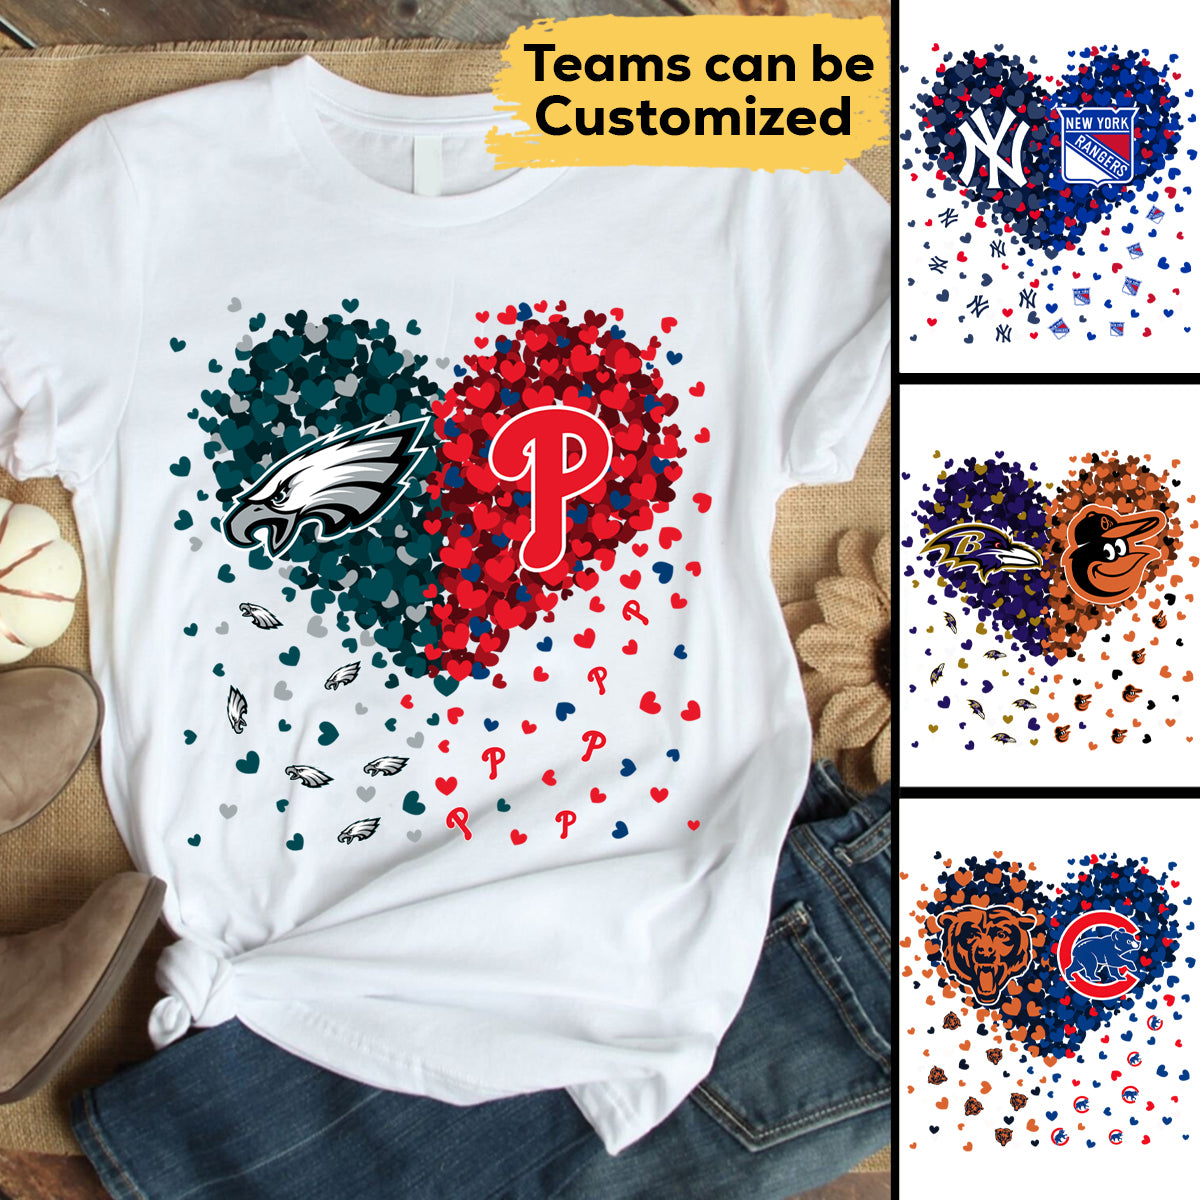 Just A Girl Loves Her Teams - Customized Shirt